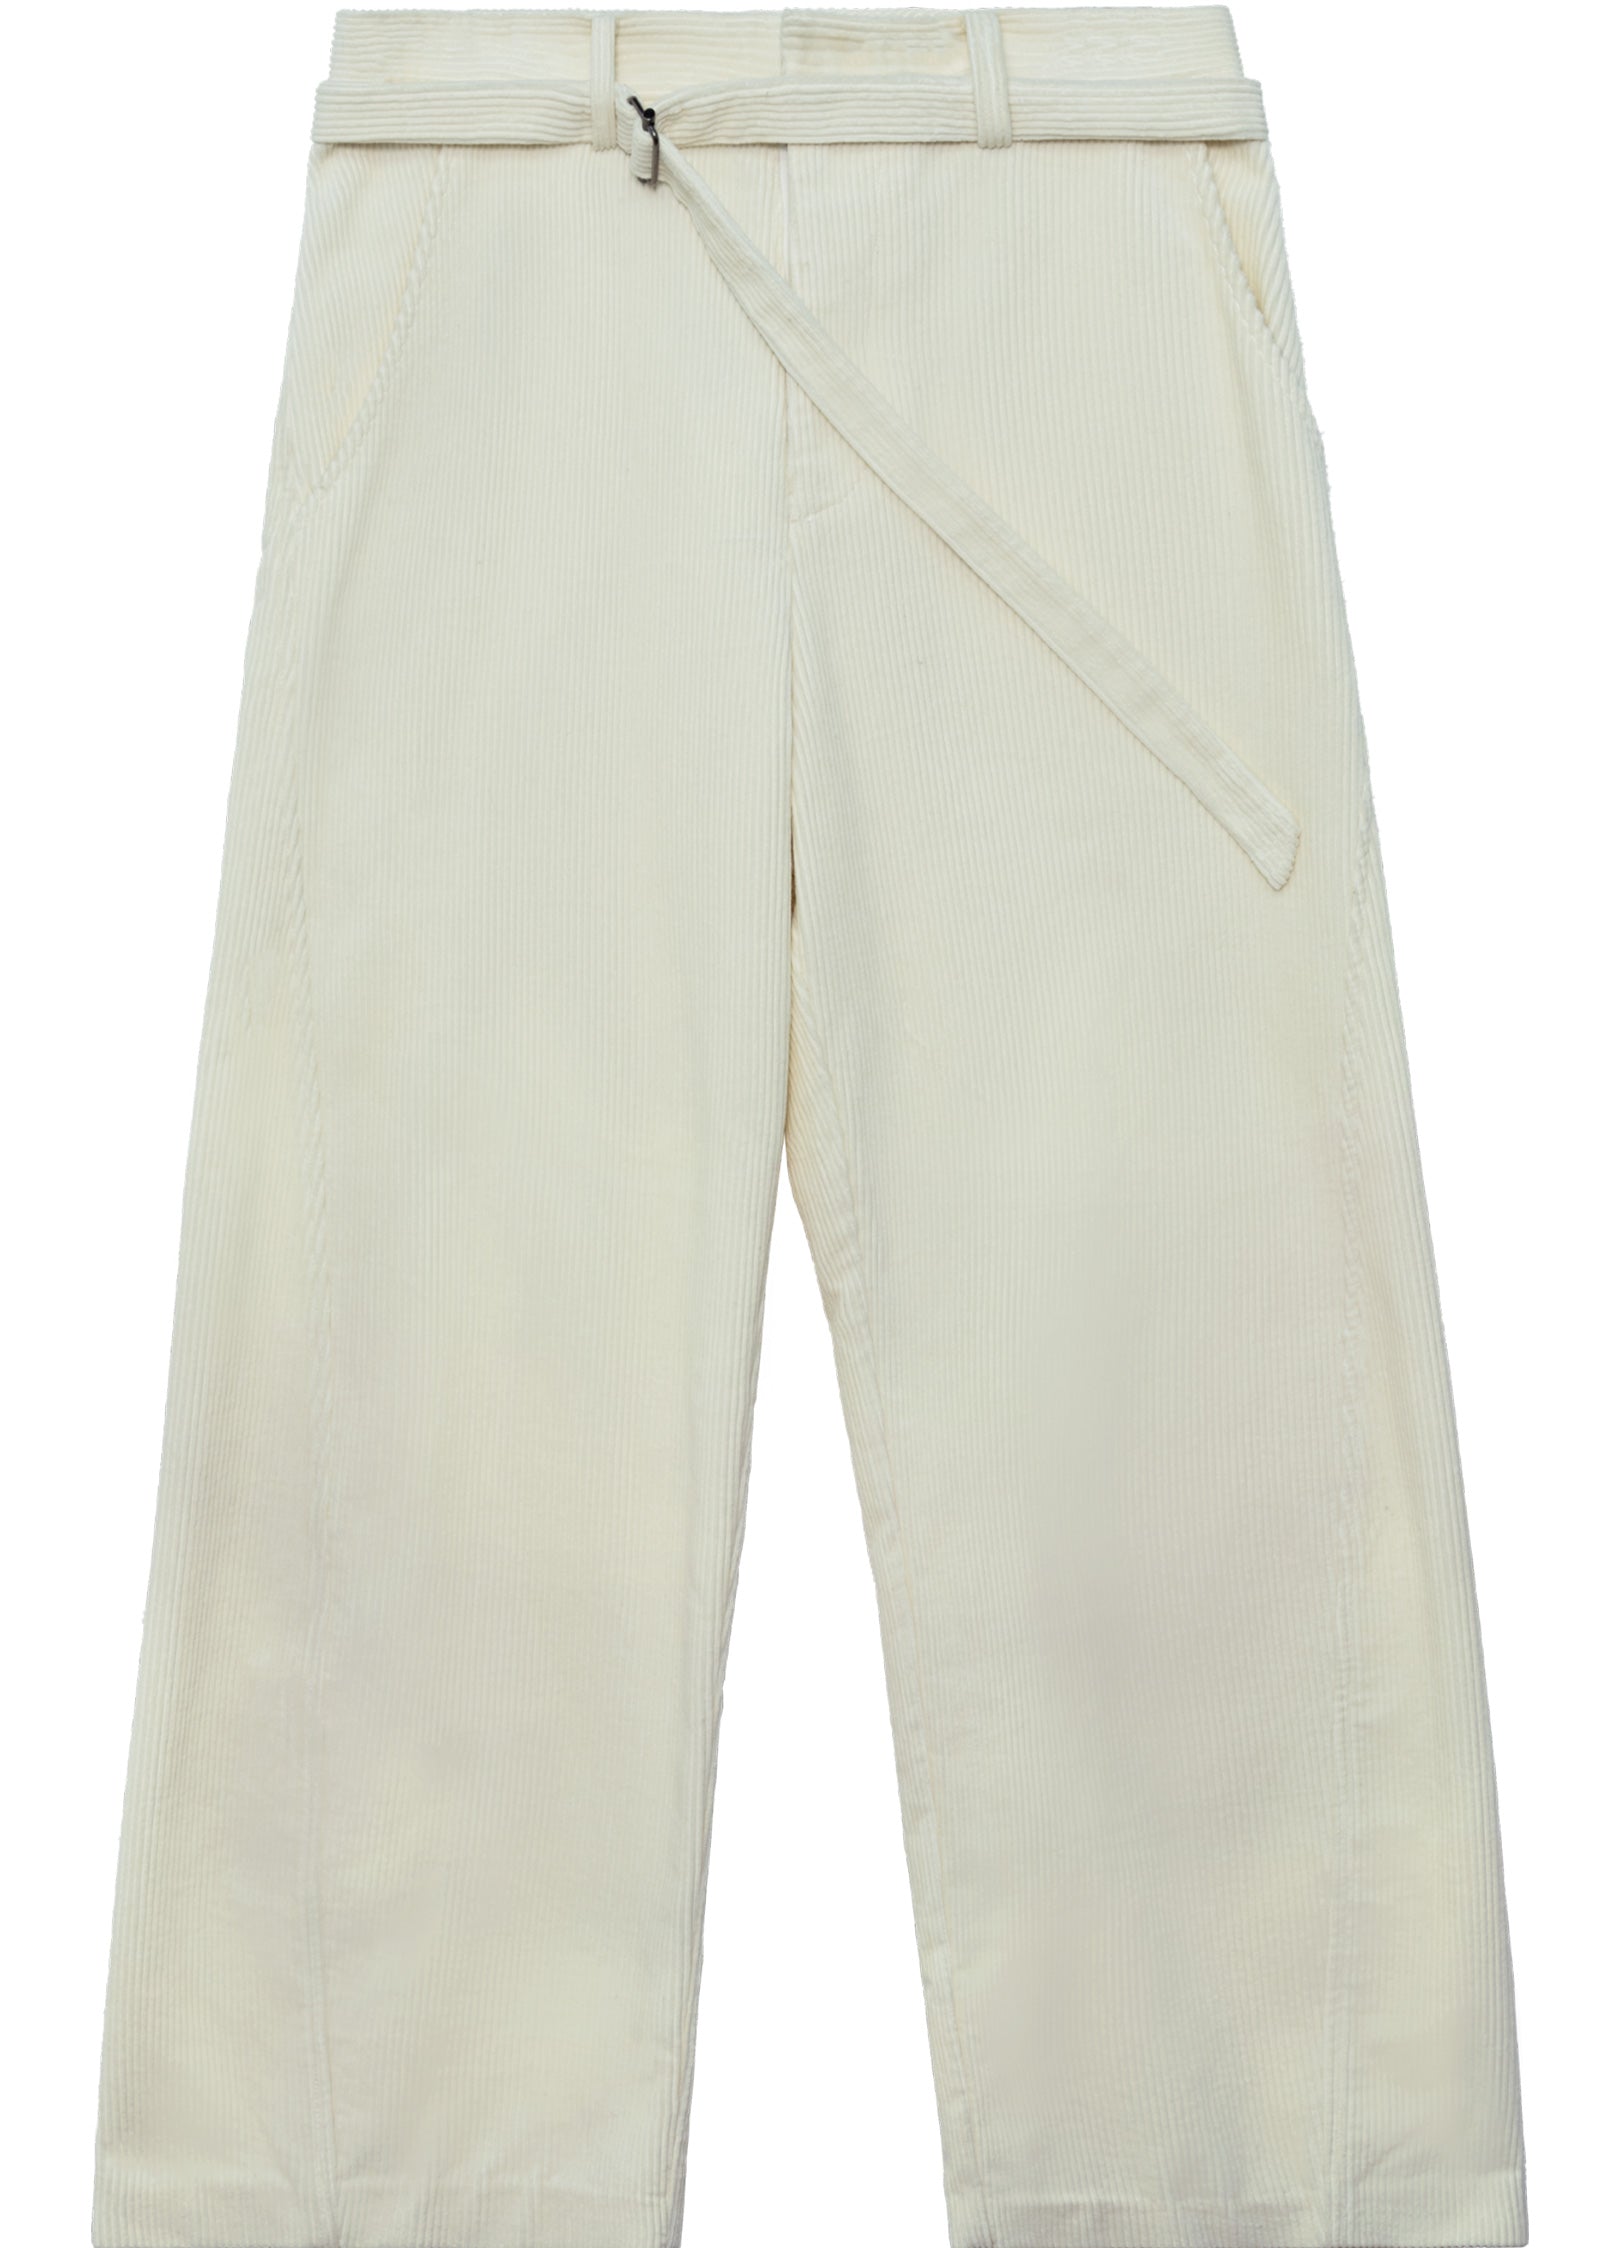 Wide leg white corduroy trousers, spring style with perplex heels